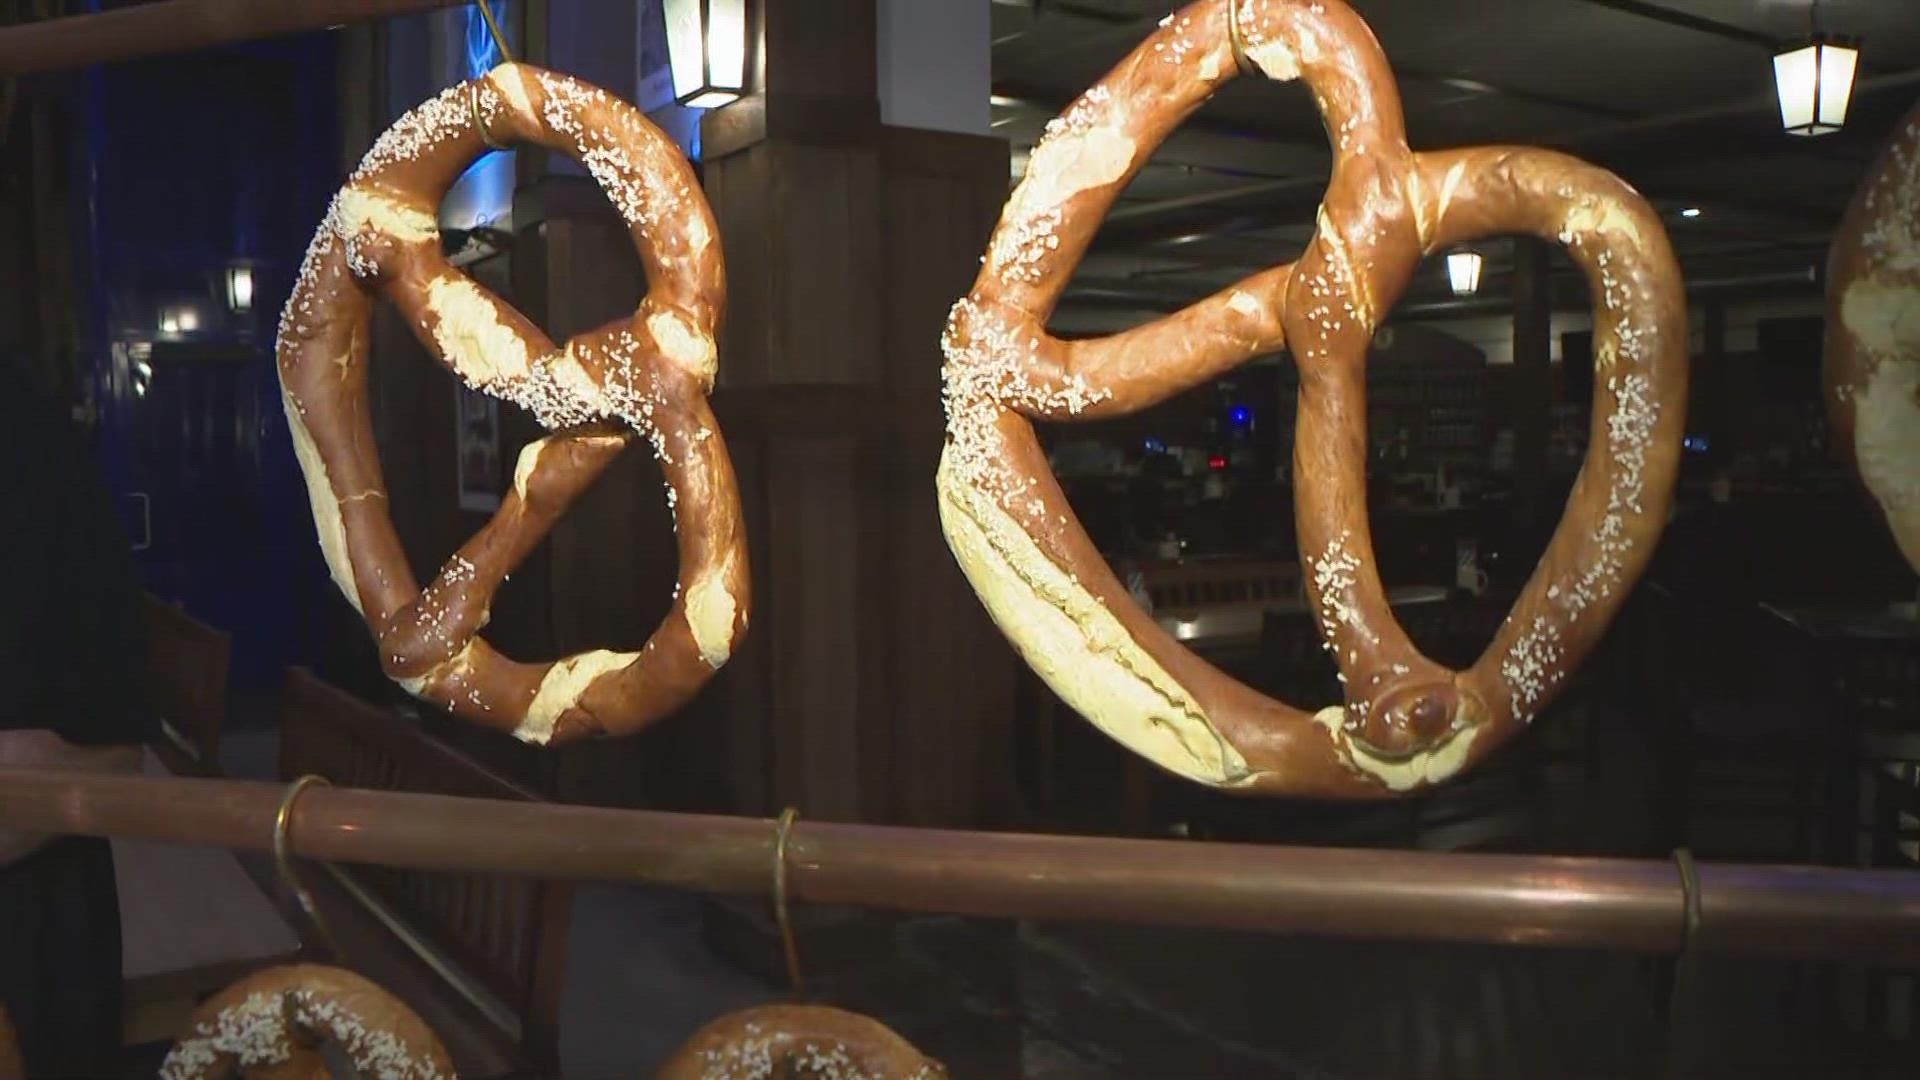 The German beer hall on Scott Street will host festivities through the end of October.